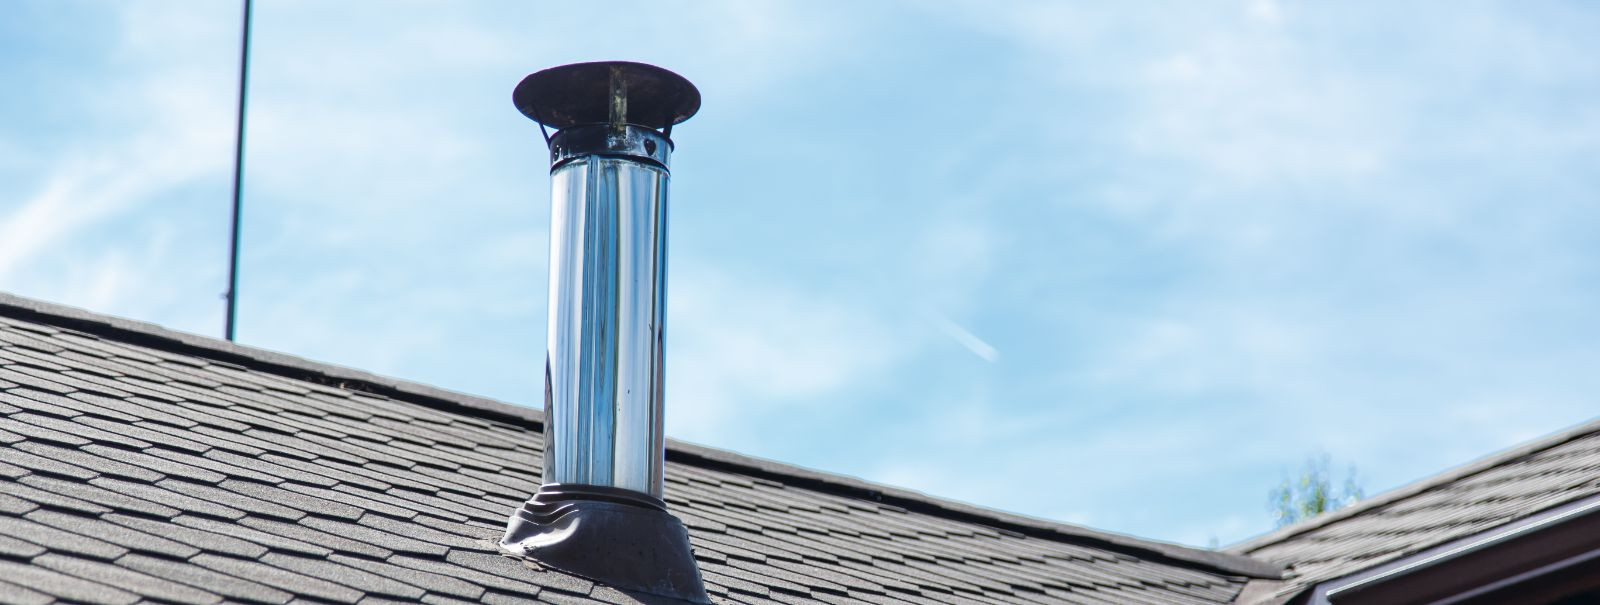 Modular chimneys are prefabricated chimney systems that are designed for quick and efficient installation. They consist of interlocking sections that can be eas